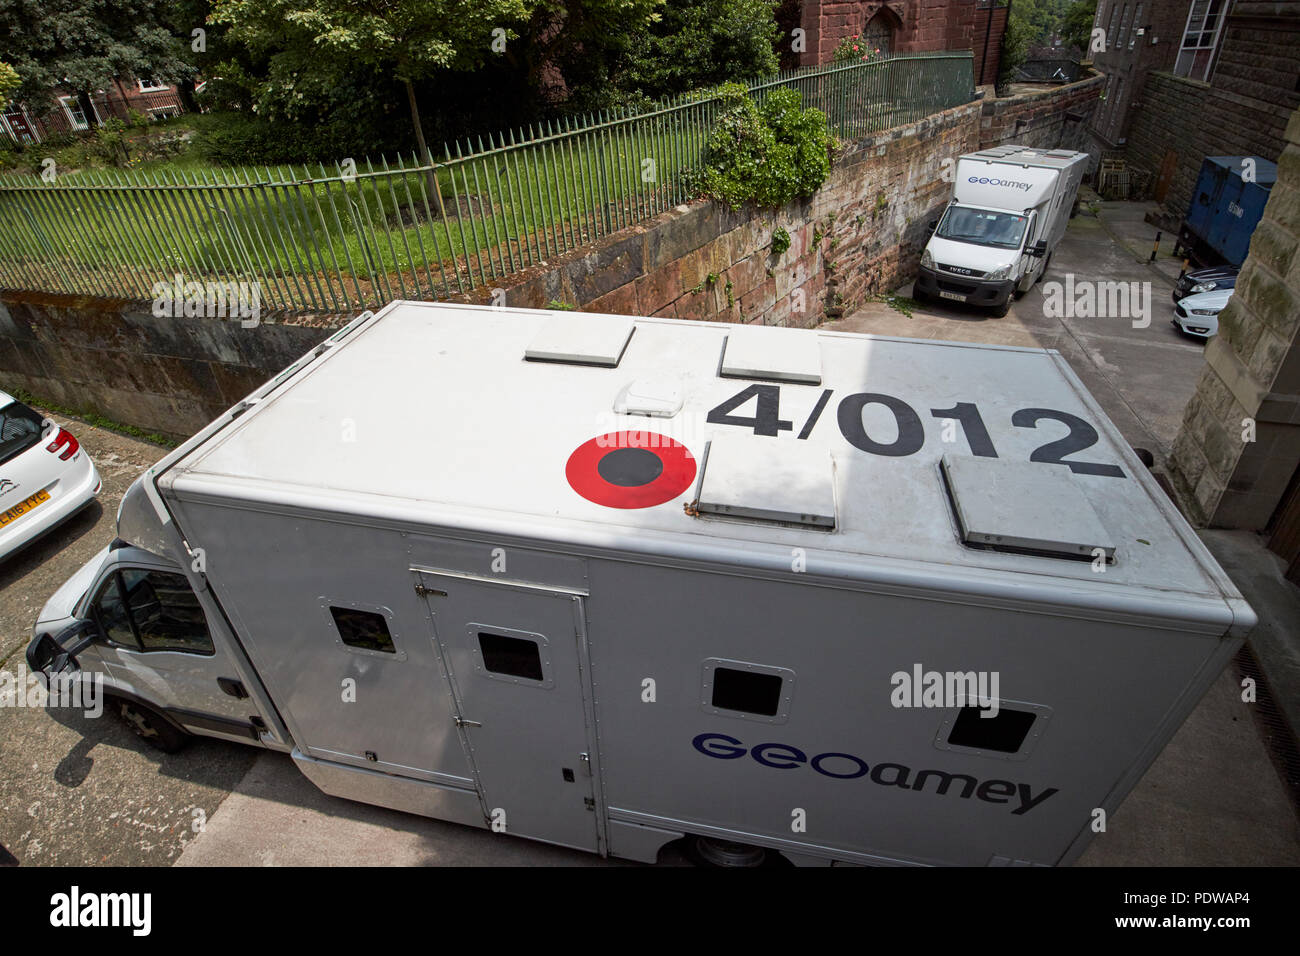 identification number on the roof of a geoamey prisoner transport vehicle outside chester crown court at chester cheshire england uk Stock Photo